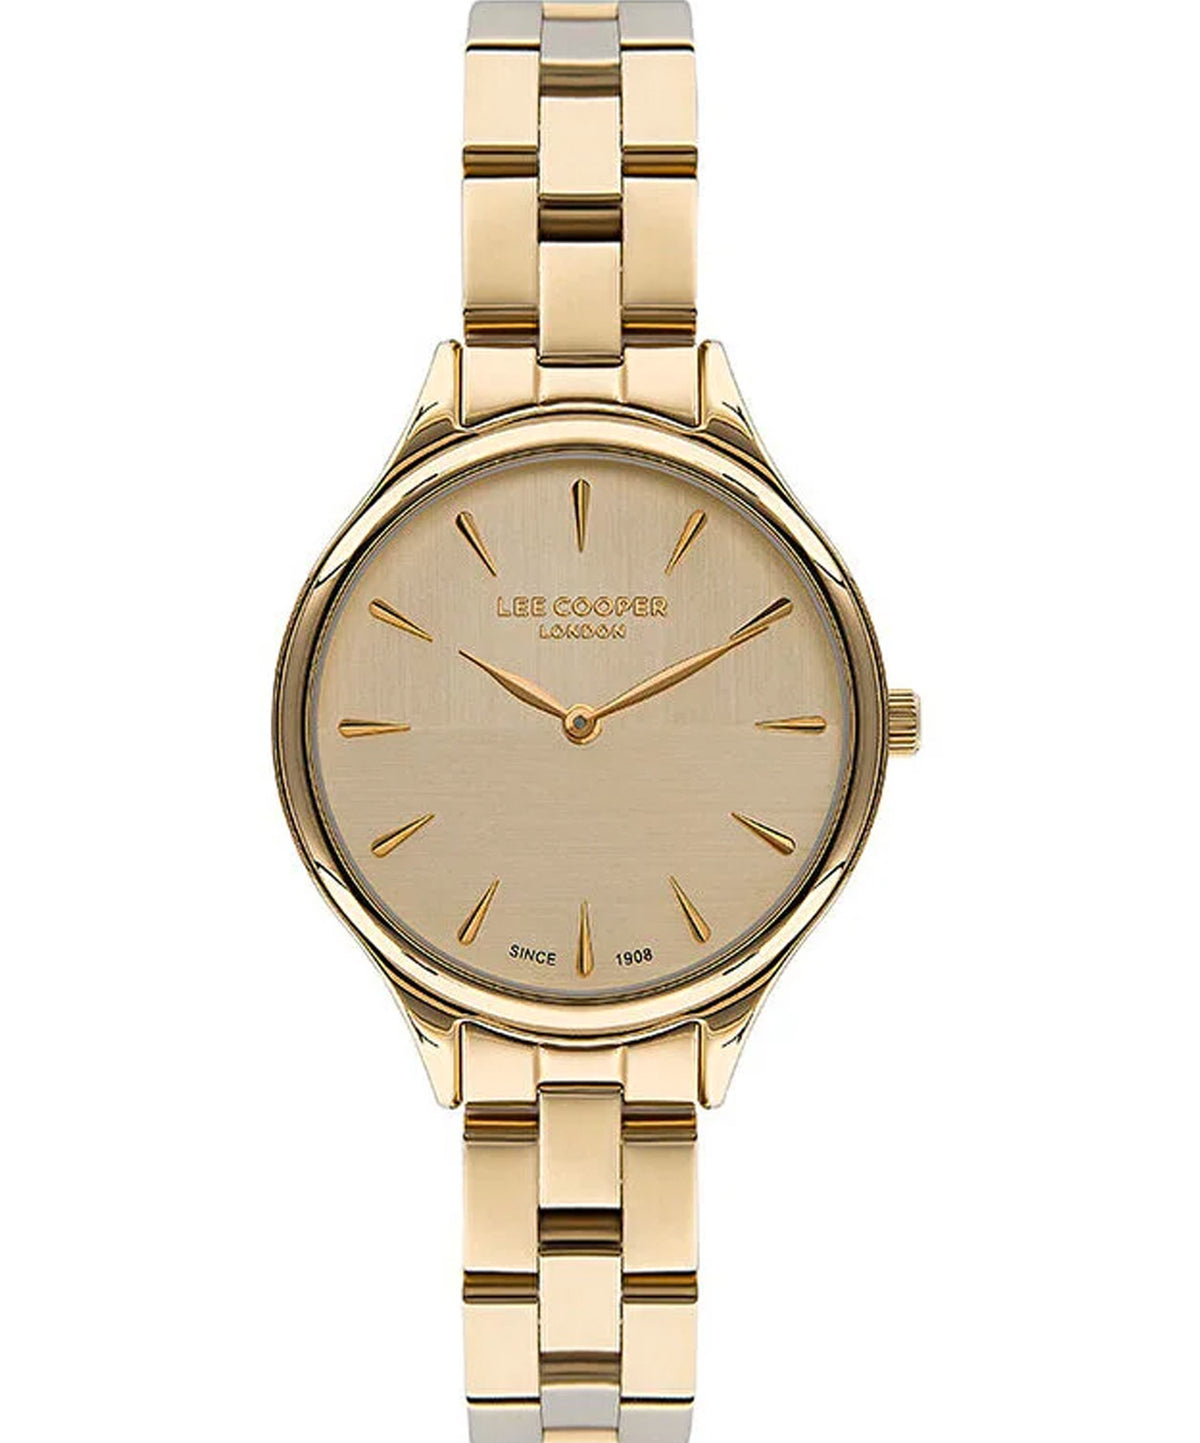 Lee Cooper  Women's Watch Gold Dial Gold Metal Strap, LC07568.110